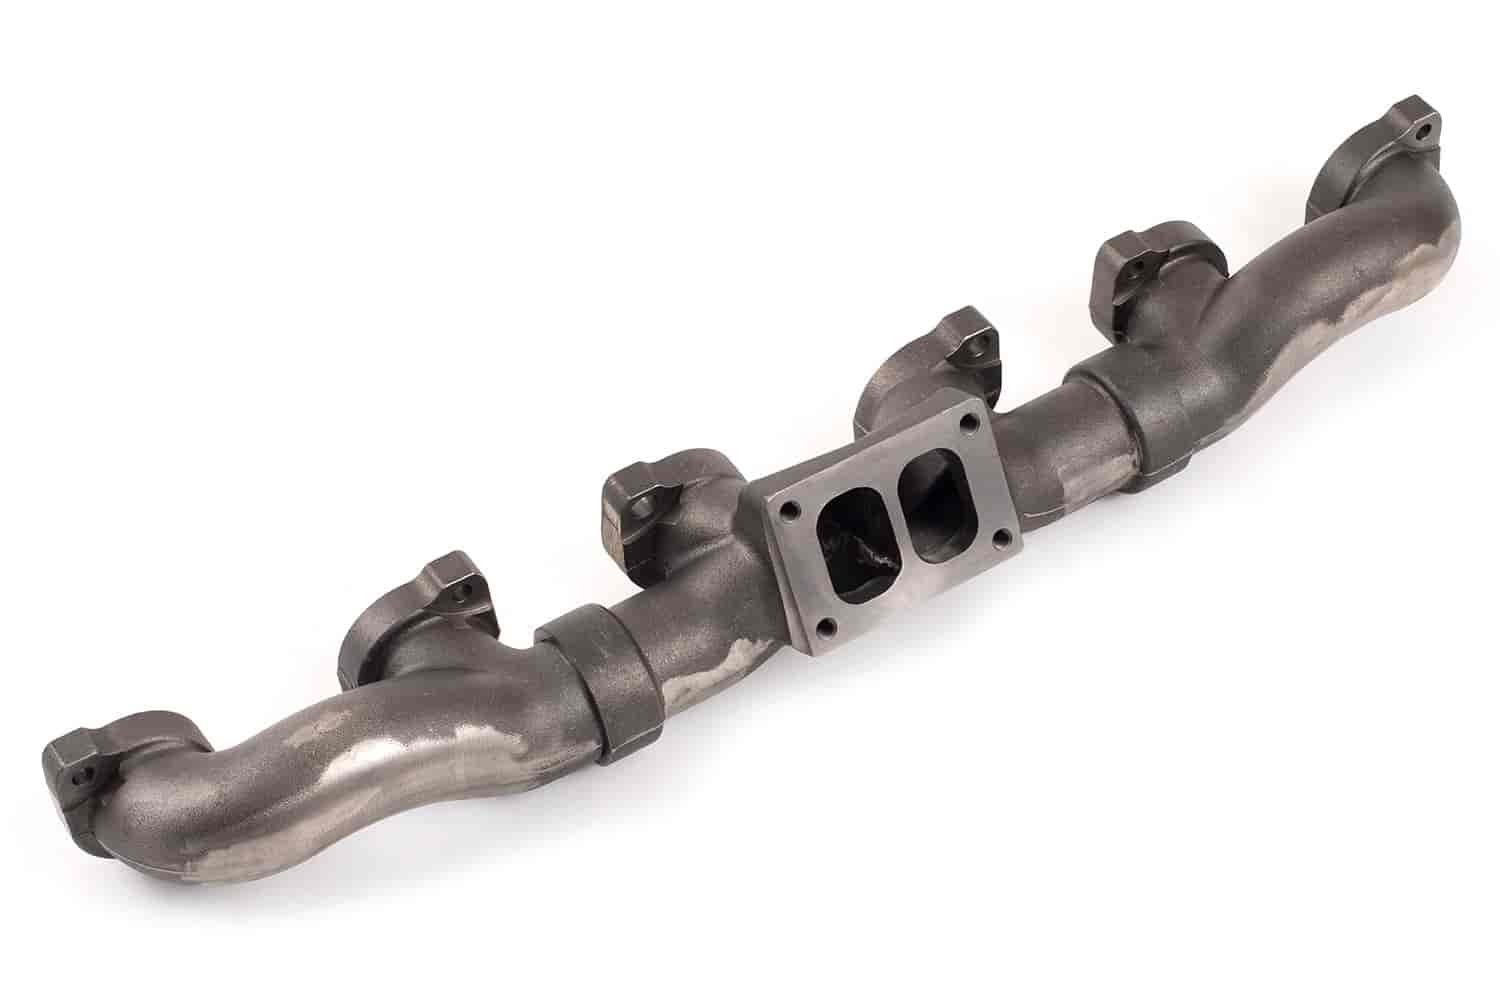 Big Boss Series 60 Exhaust Manifold for 2003-2006 Detroit Series 60 12.7L and 14L Engines - Non-Coated